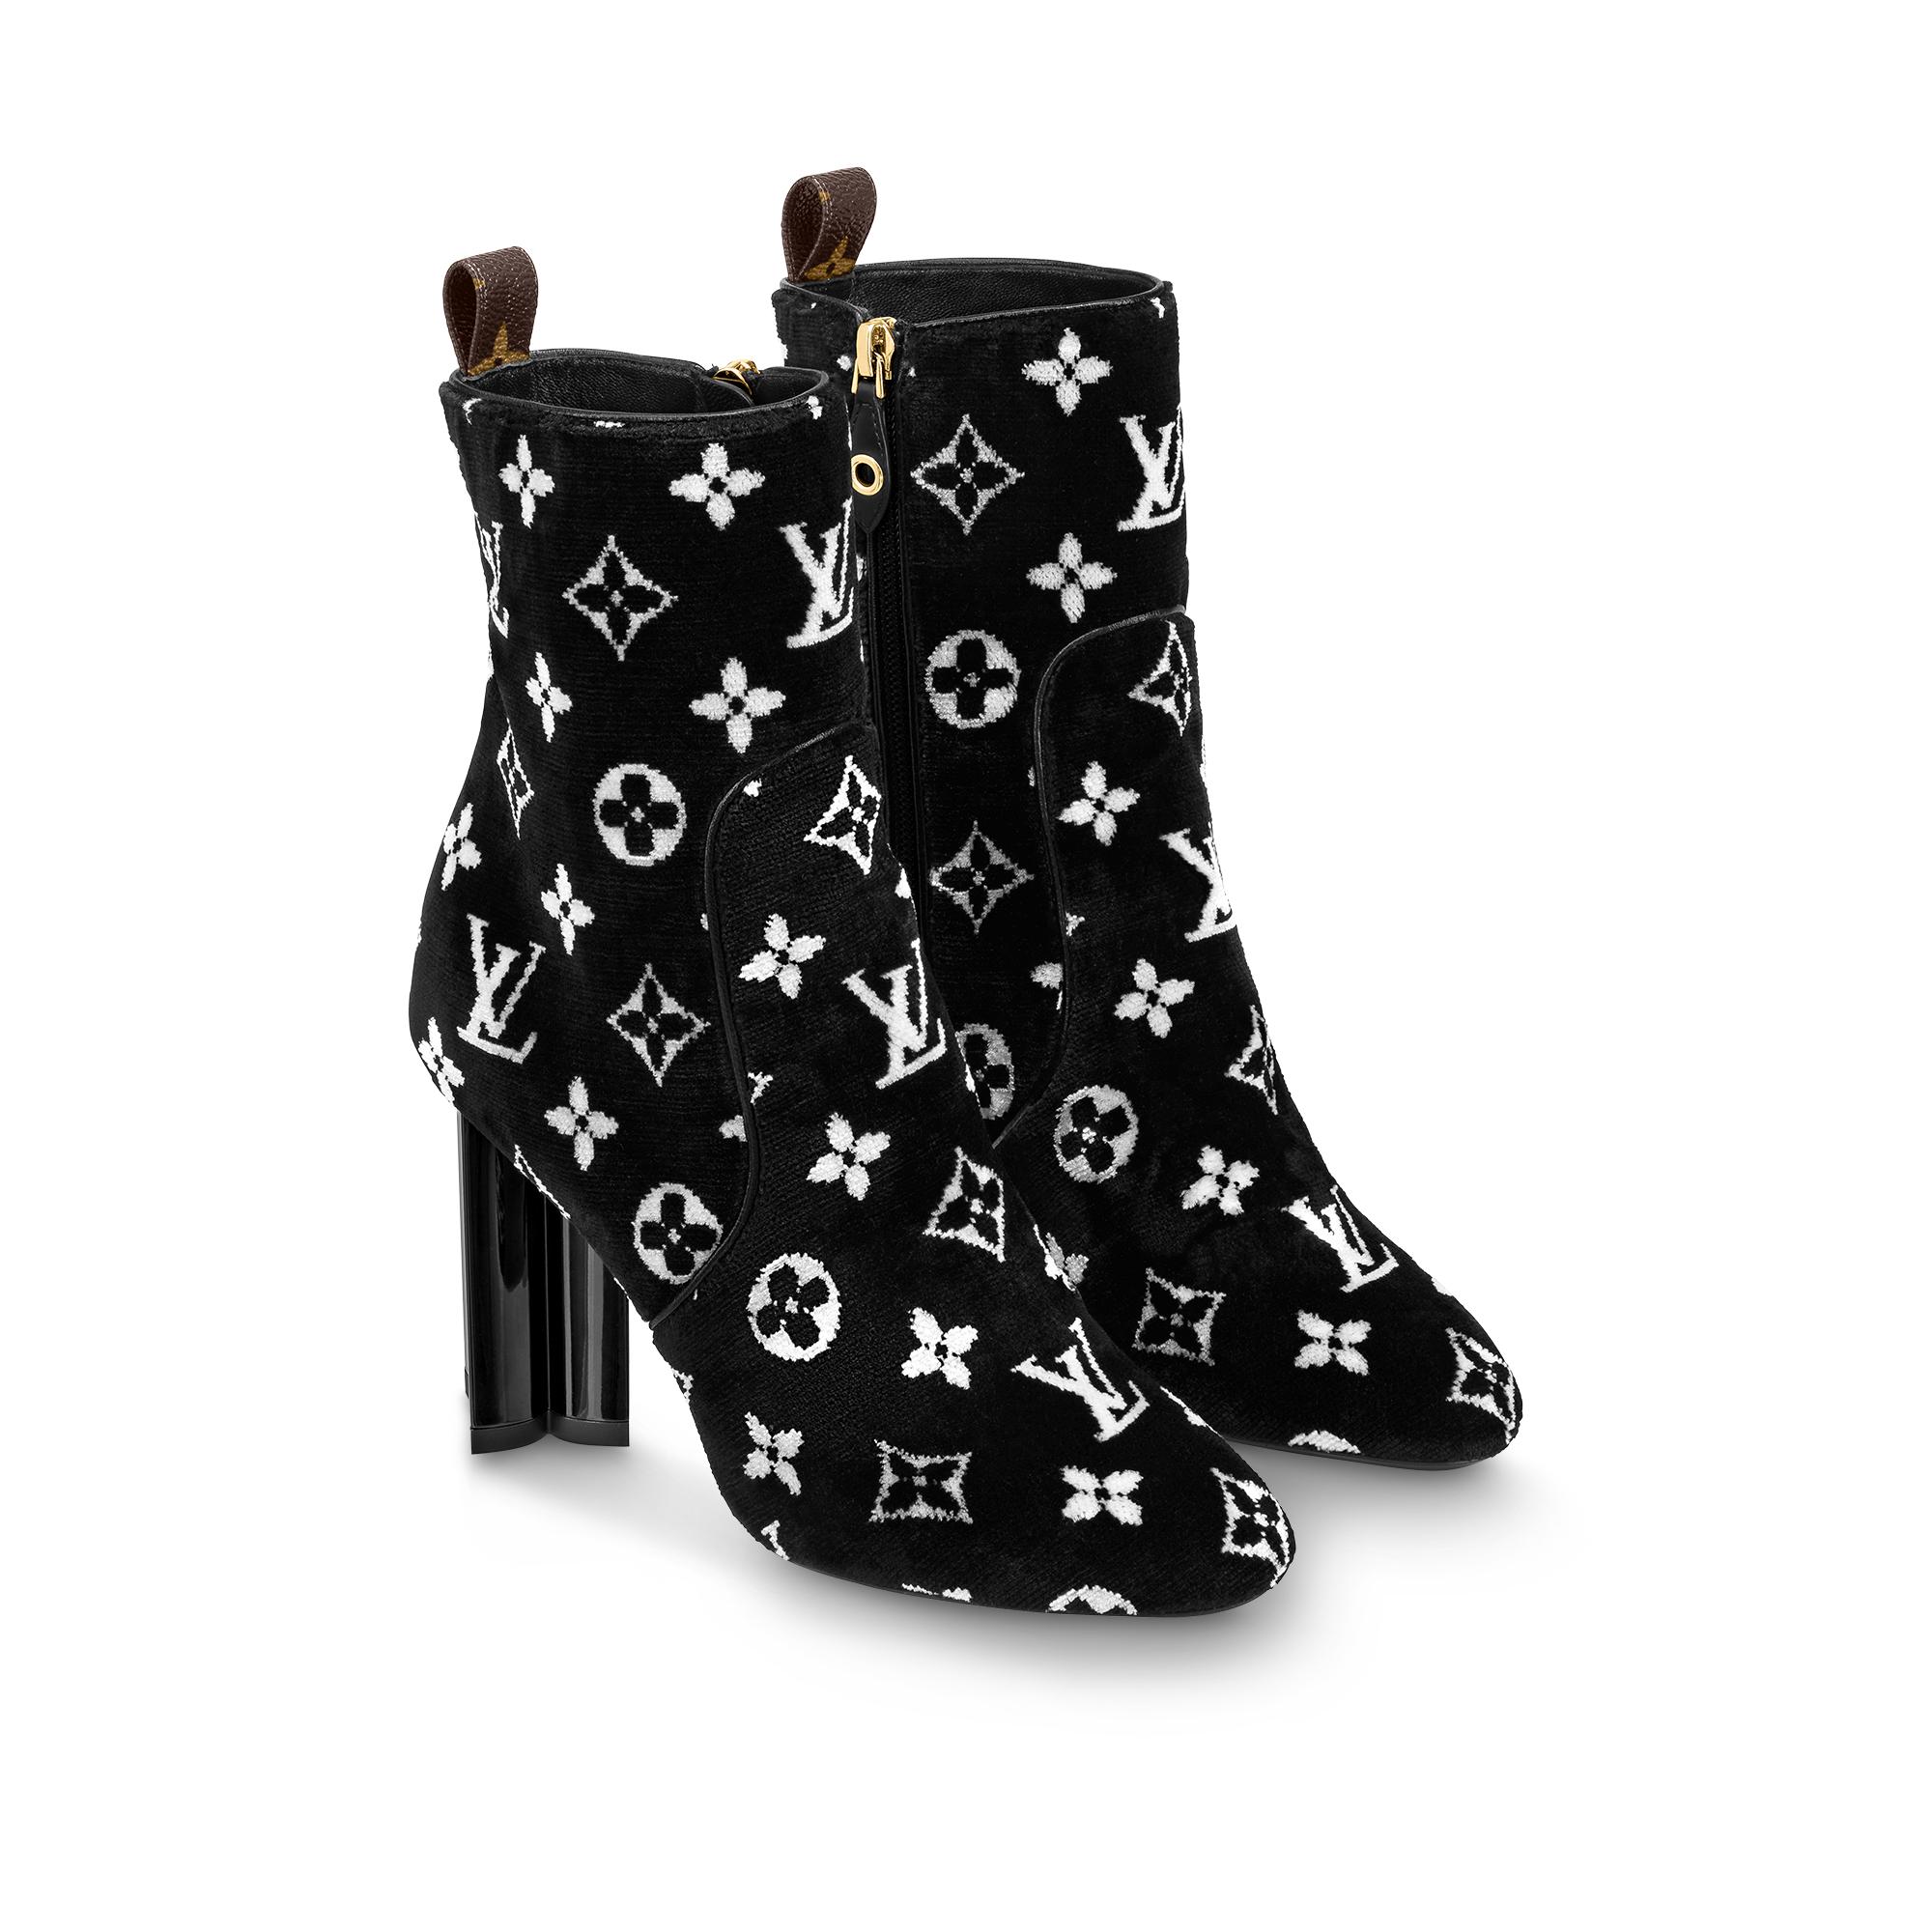 Introducing The Louis Vuitton Silhouette Ankle Boot - Brands Blogger   Louis vuitton shoes heels, Louis vuitton boots, Louis vuitton shoes